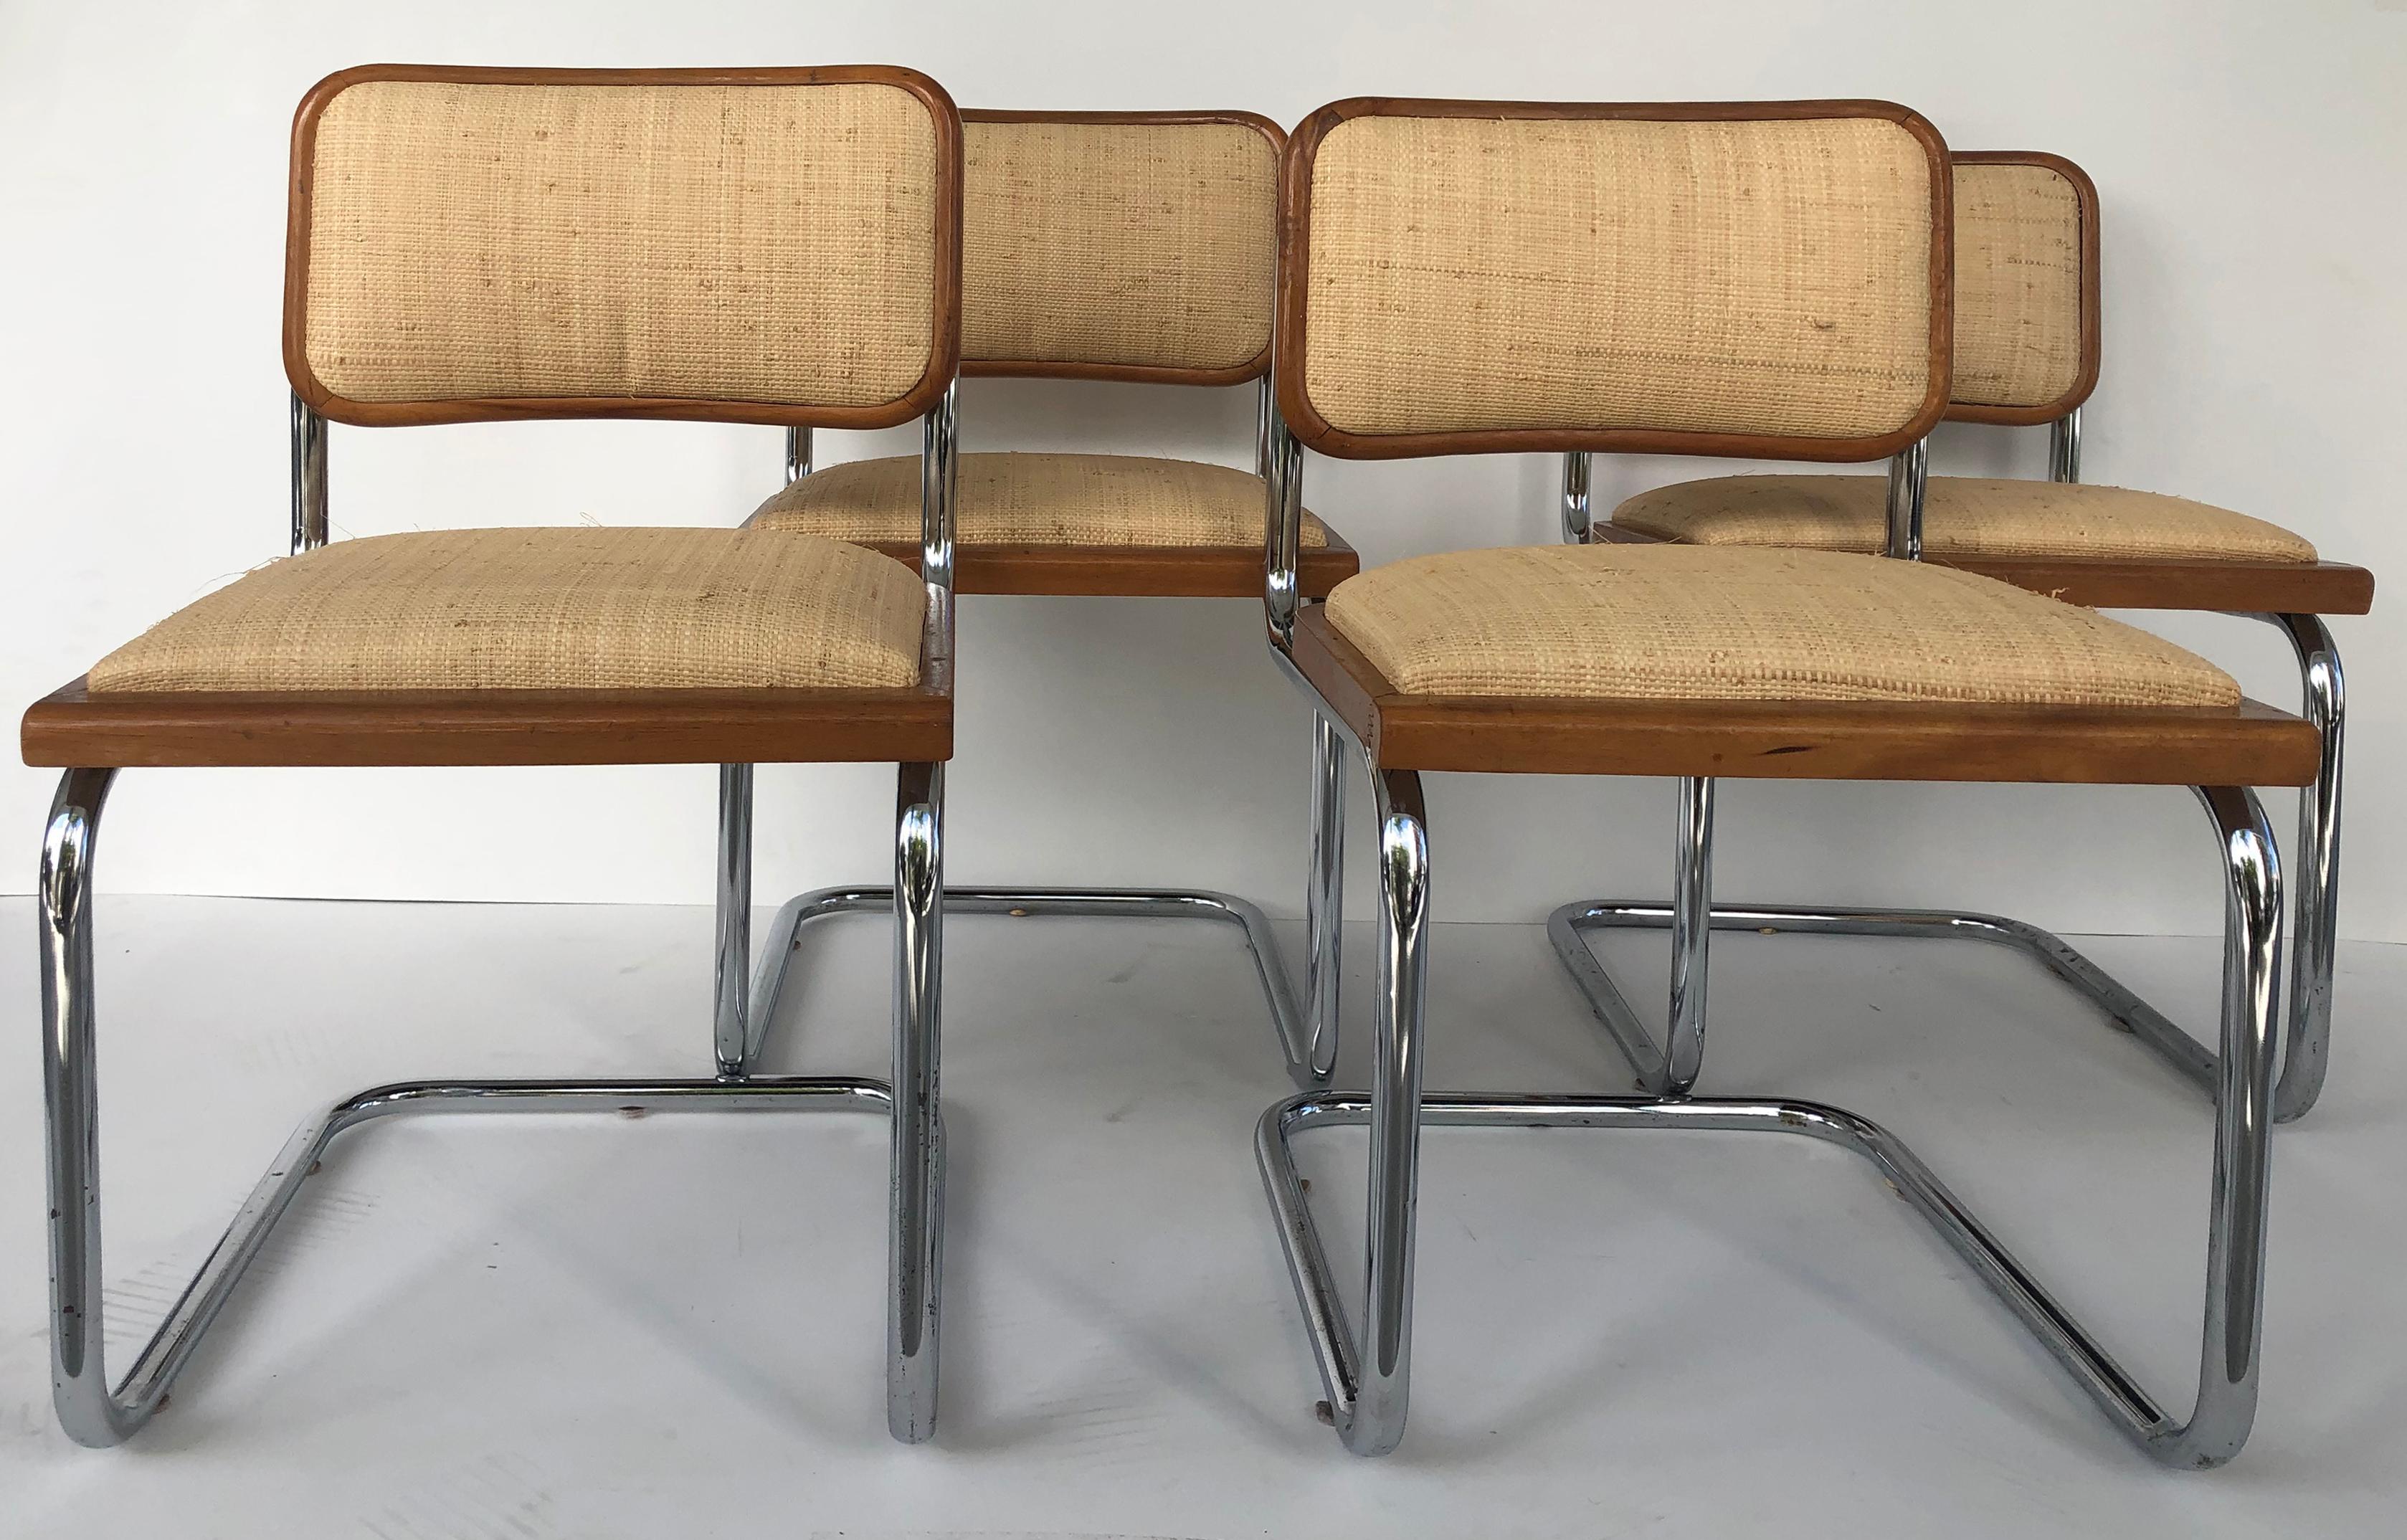 Marcel Breuer Knoll chrome Cesca chairs upholstered in Raffia, set of four

Offered is a set of four Marcel Breuer Cesca tubular chrome side chairs with brand new raffia upholstery.